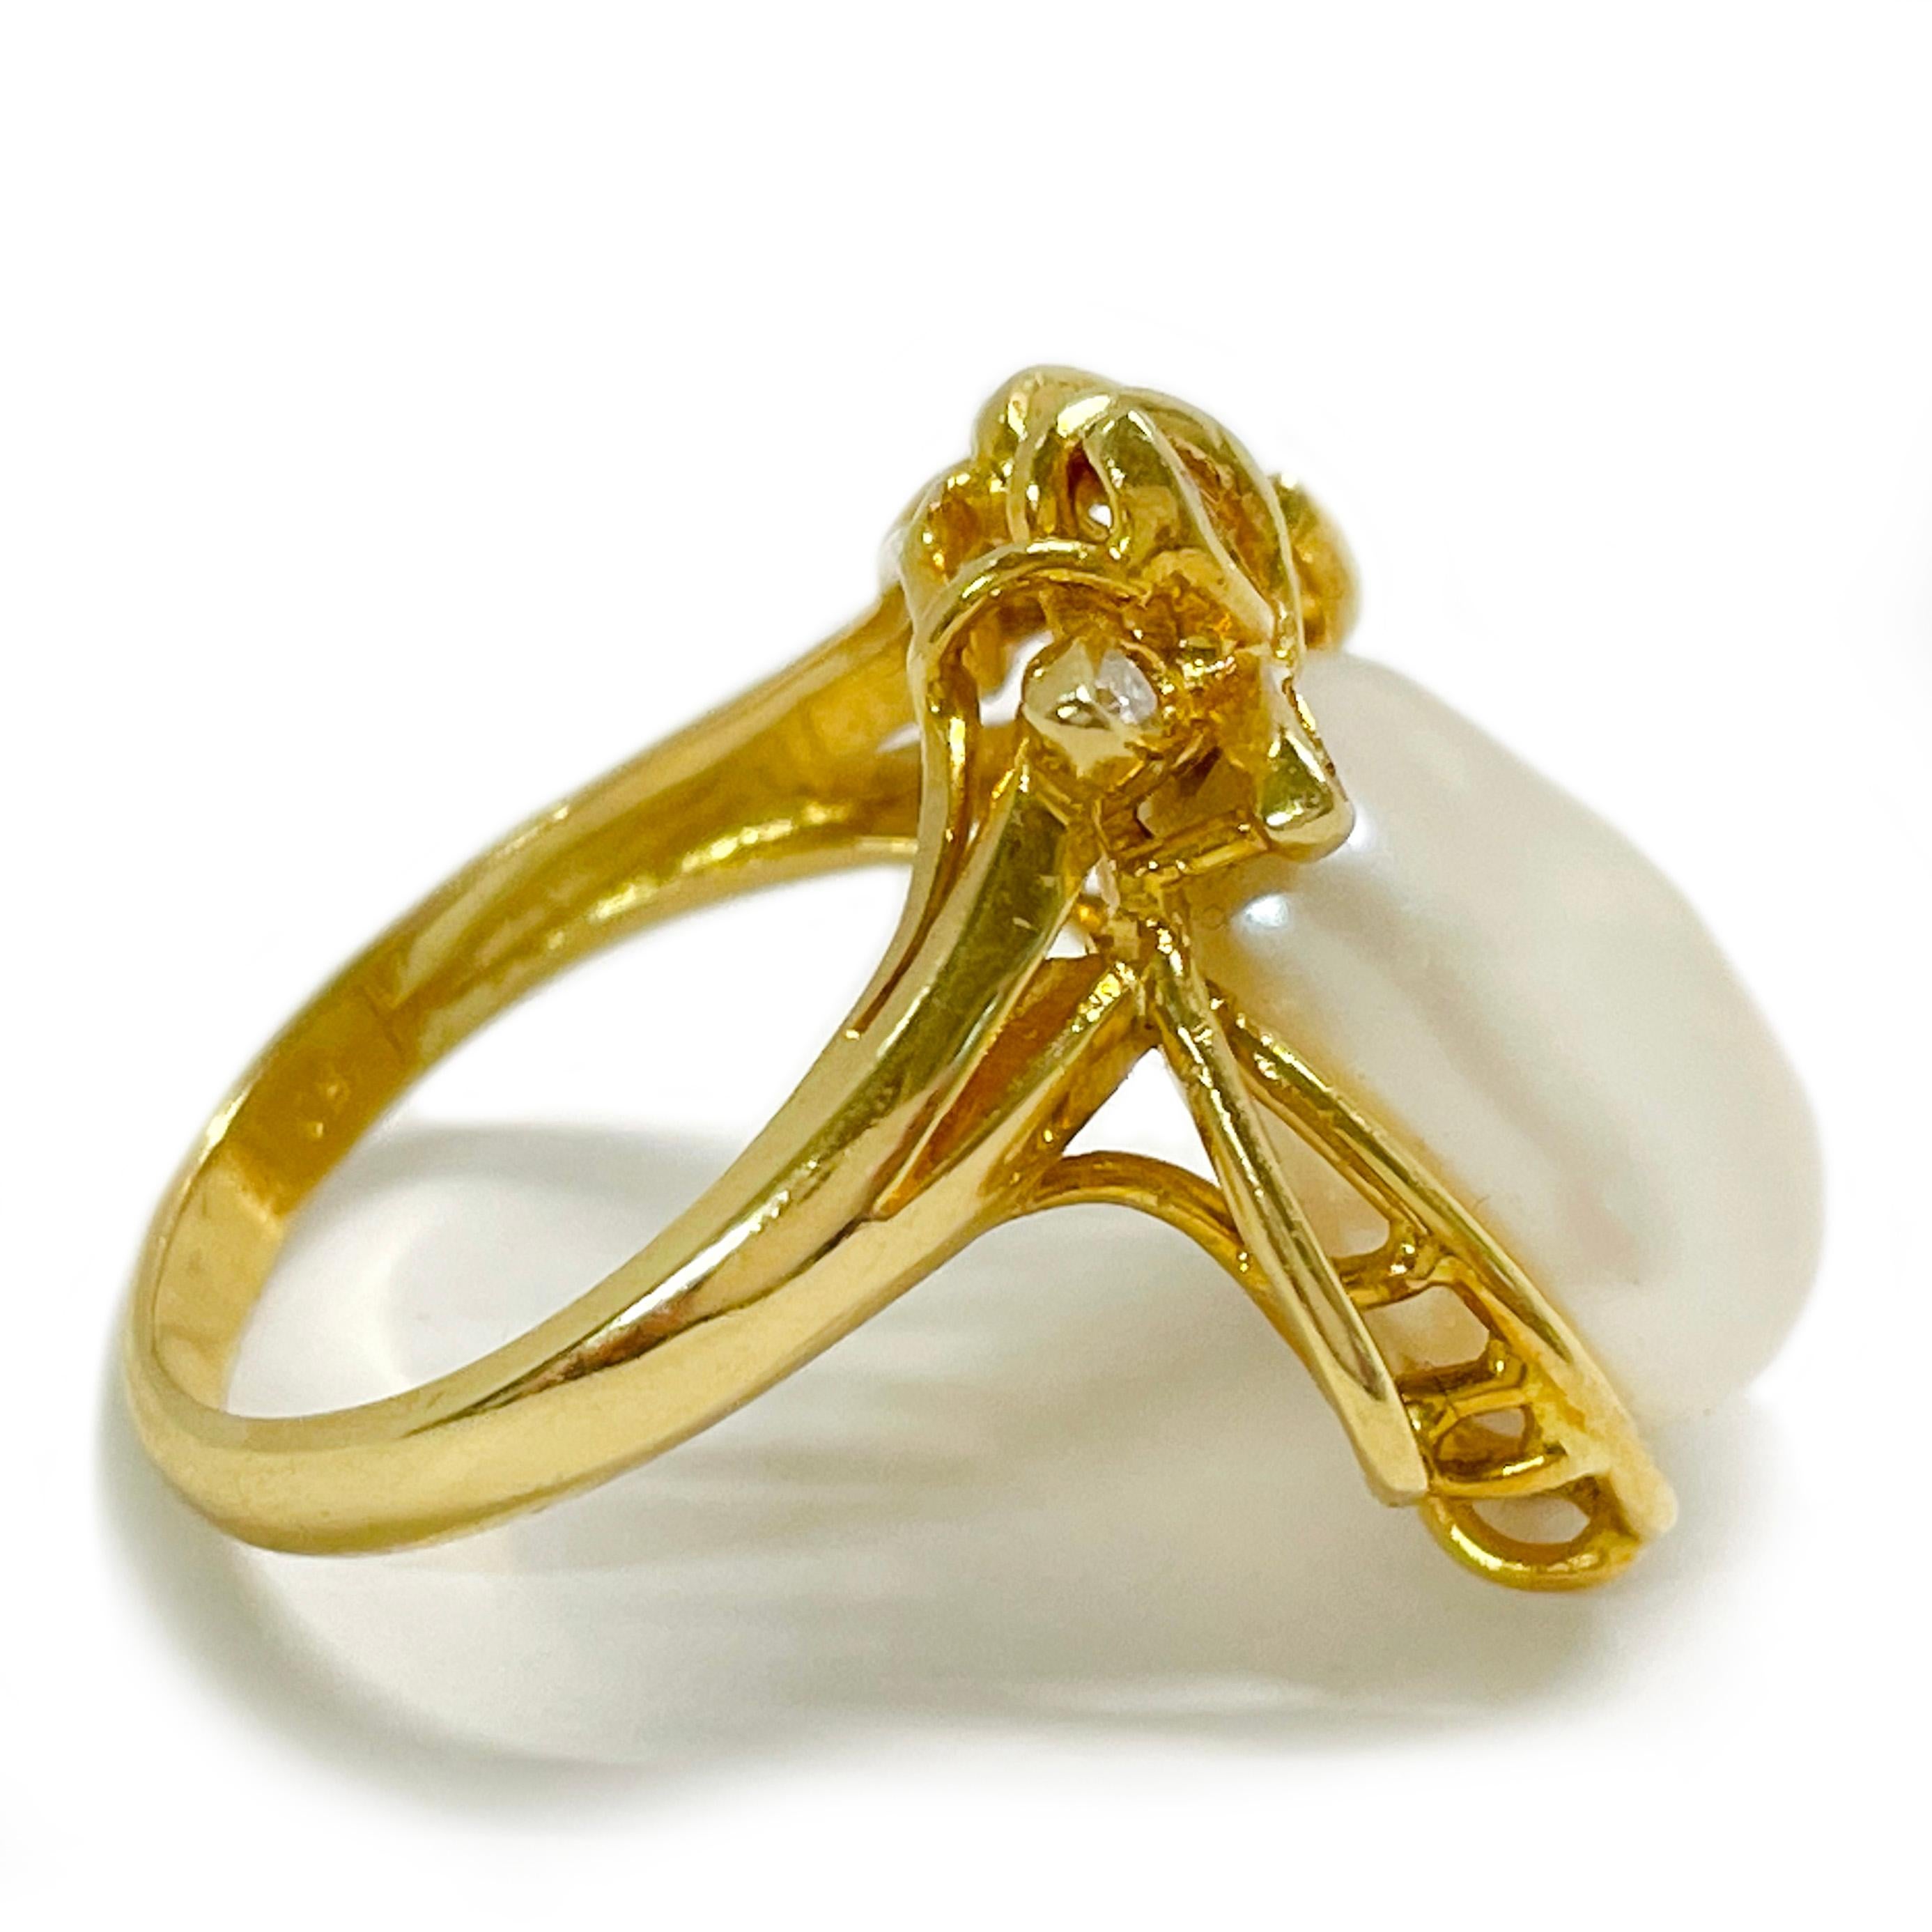 18 Karat Yellow Gold Flat Freshwater White Pearl Diamond Ring. The ring features a center pearl set in an open bezel with leaf-like open designs and six round diamonds added for detail. The pearl measures 13.8 x 12.4mm and has light color play of